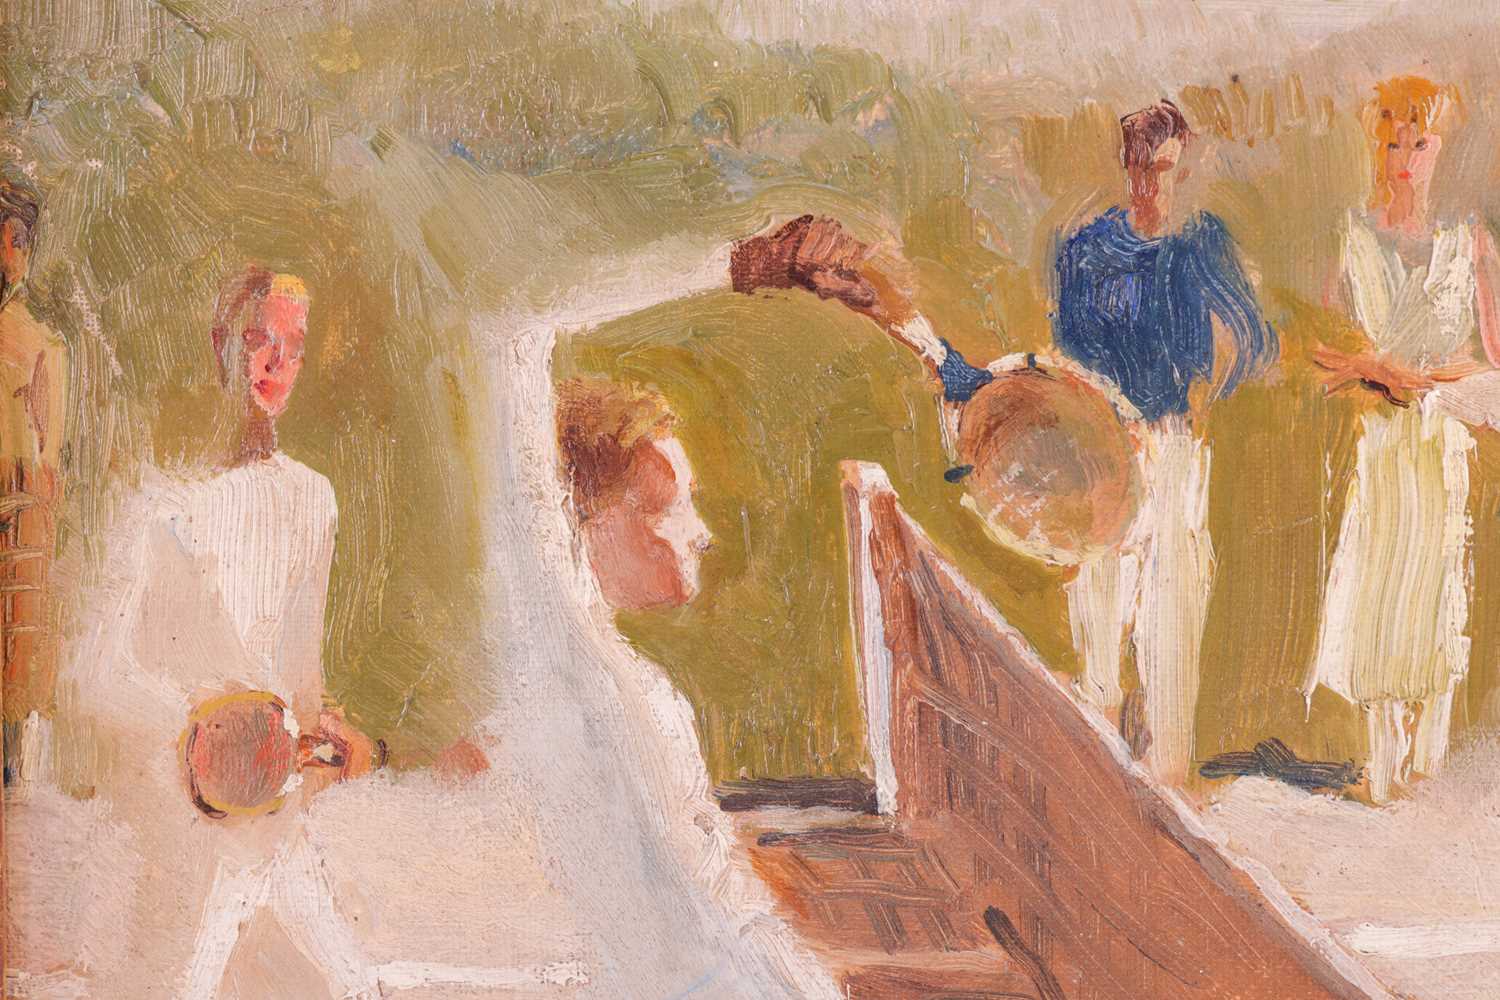 European School (Early 20th Century), The Doubles Tennis Match, unsigned, oil on canvas, 27 x 38 cm, - Image 5 of 6